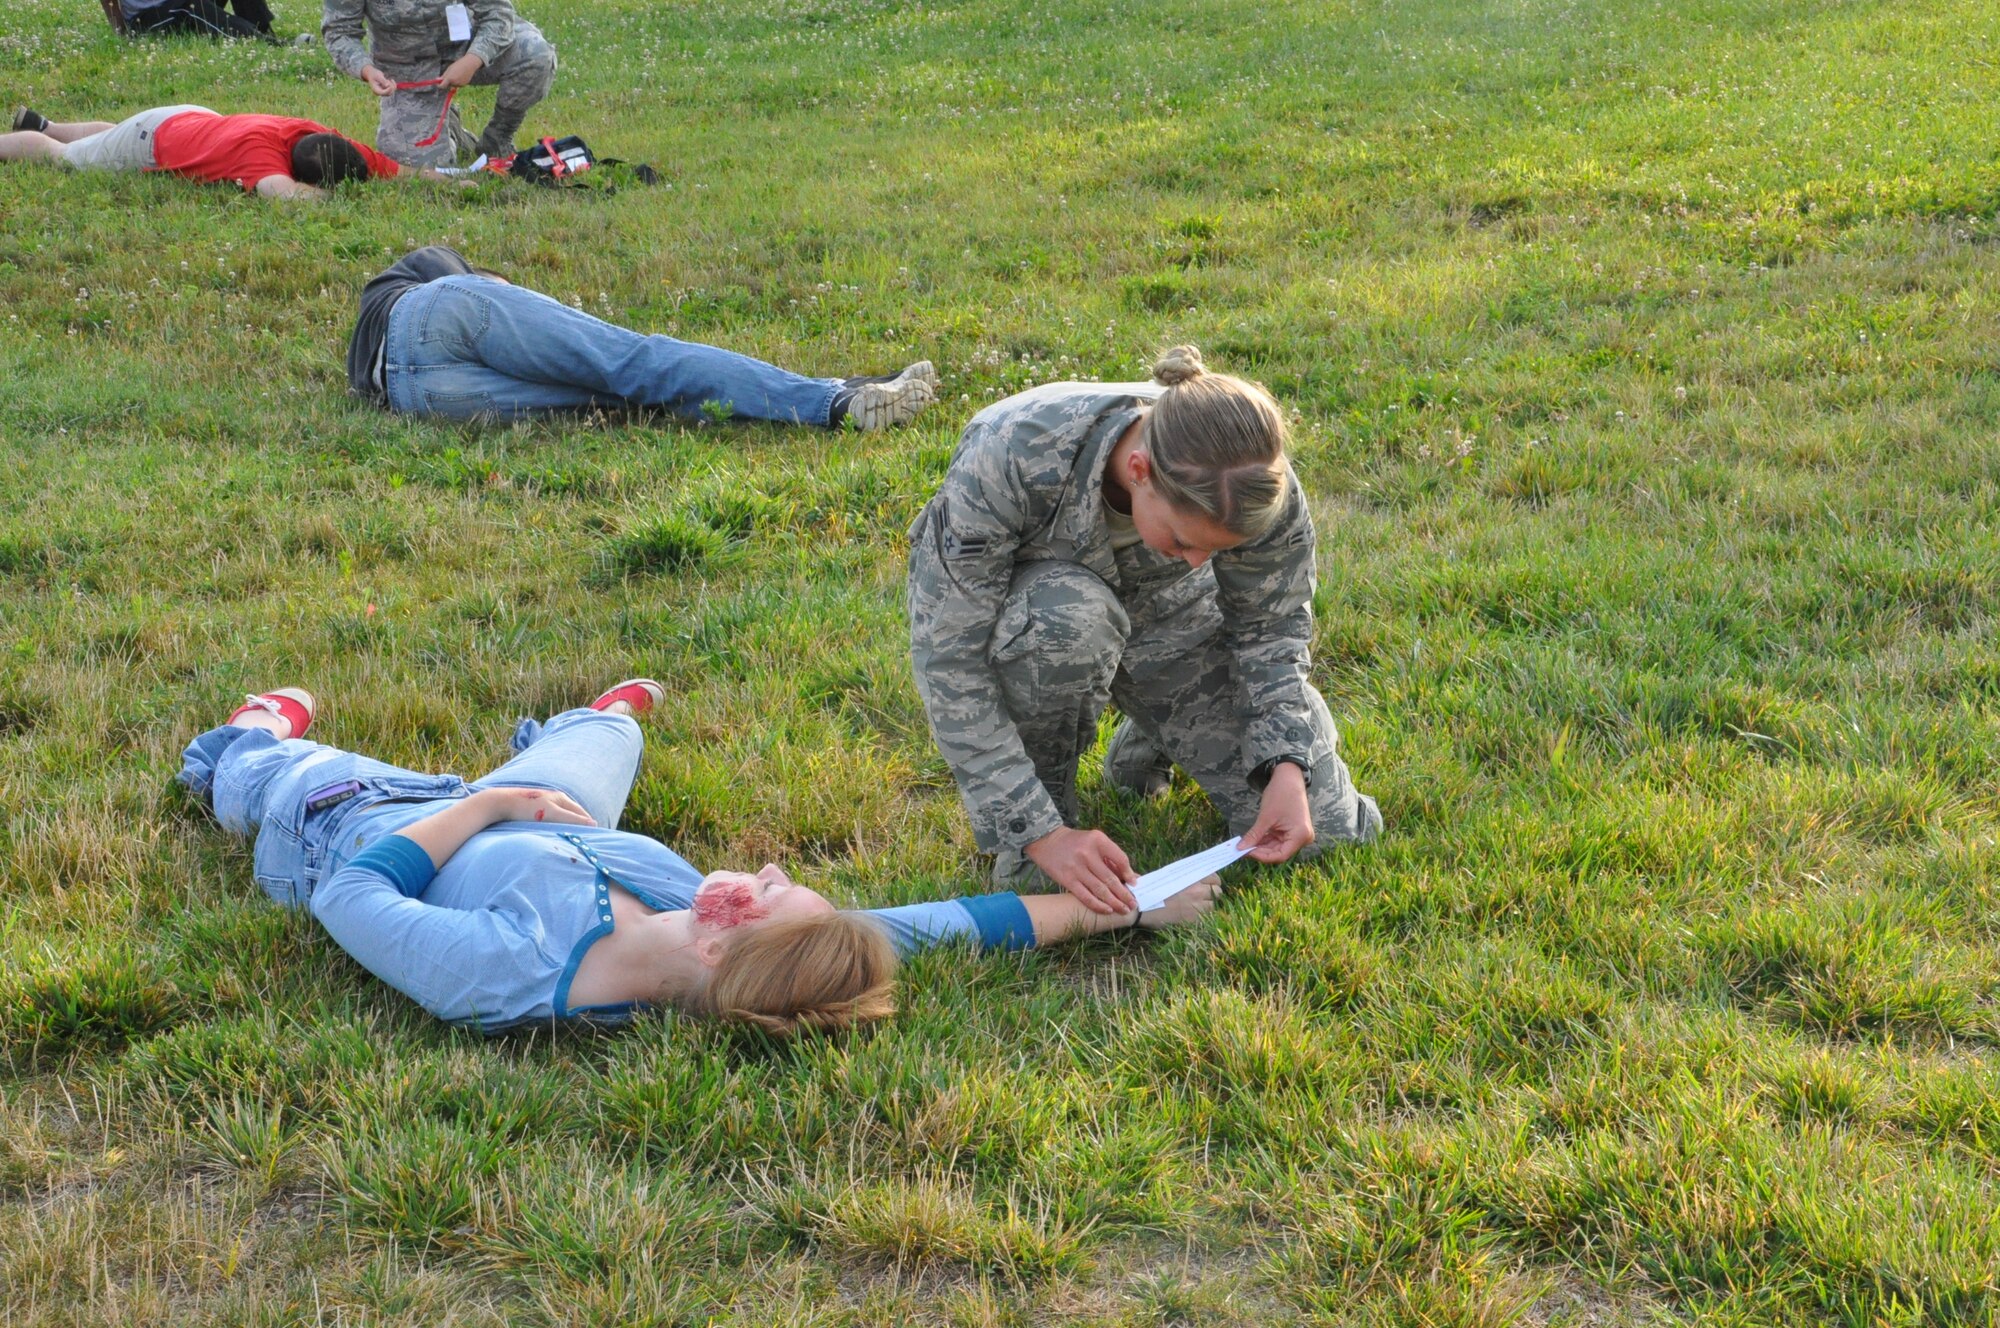 An 88th Medical Group representative cares for a bus victim during a week of exercises at Wright-Patterson Air Force Base. (Air Force photo by Diane Kofoed)